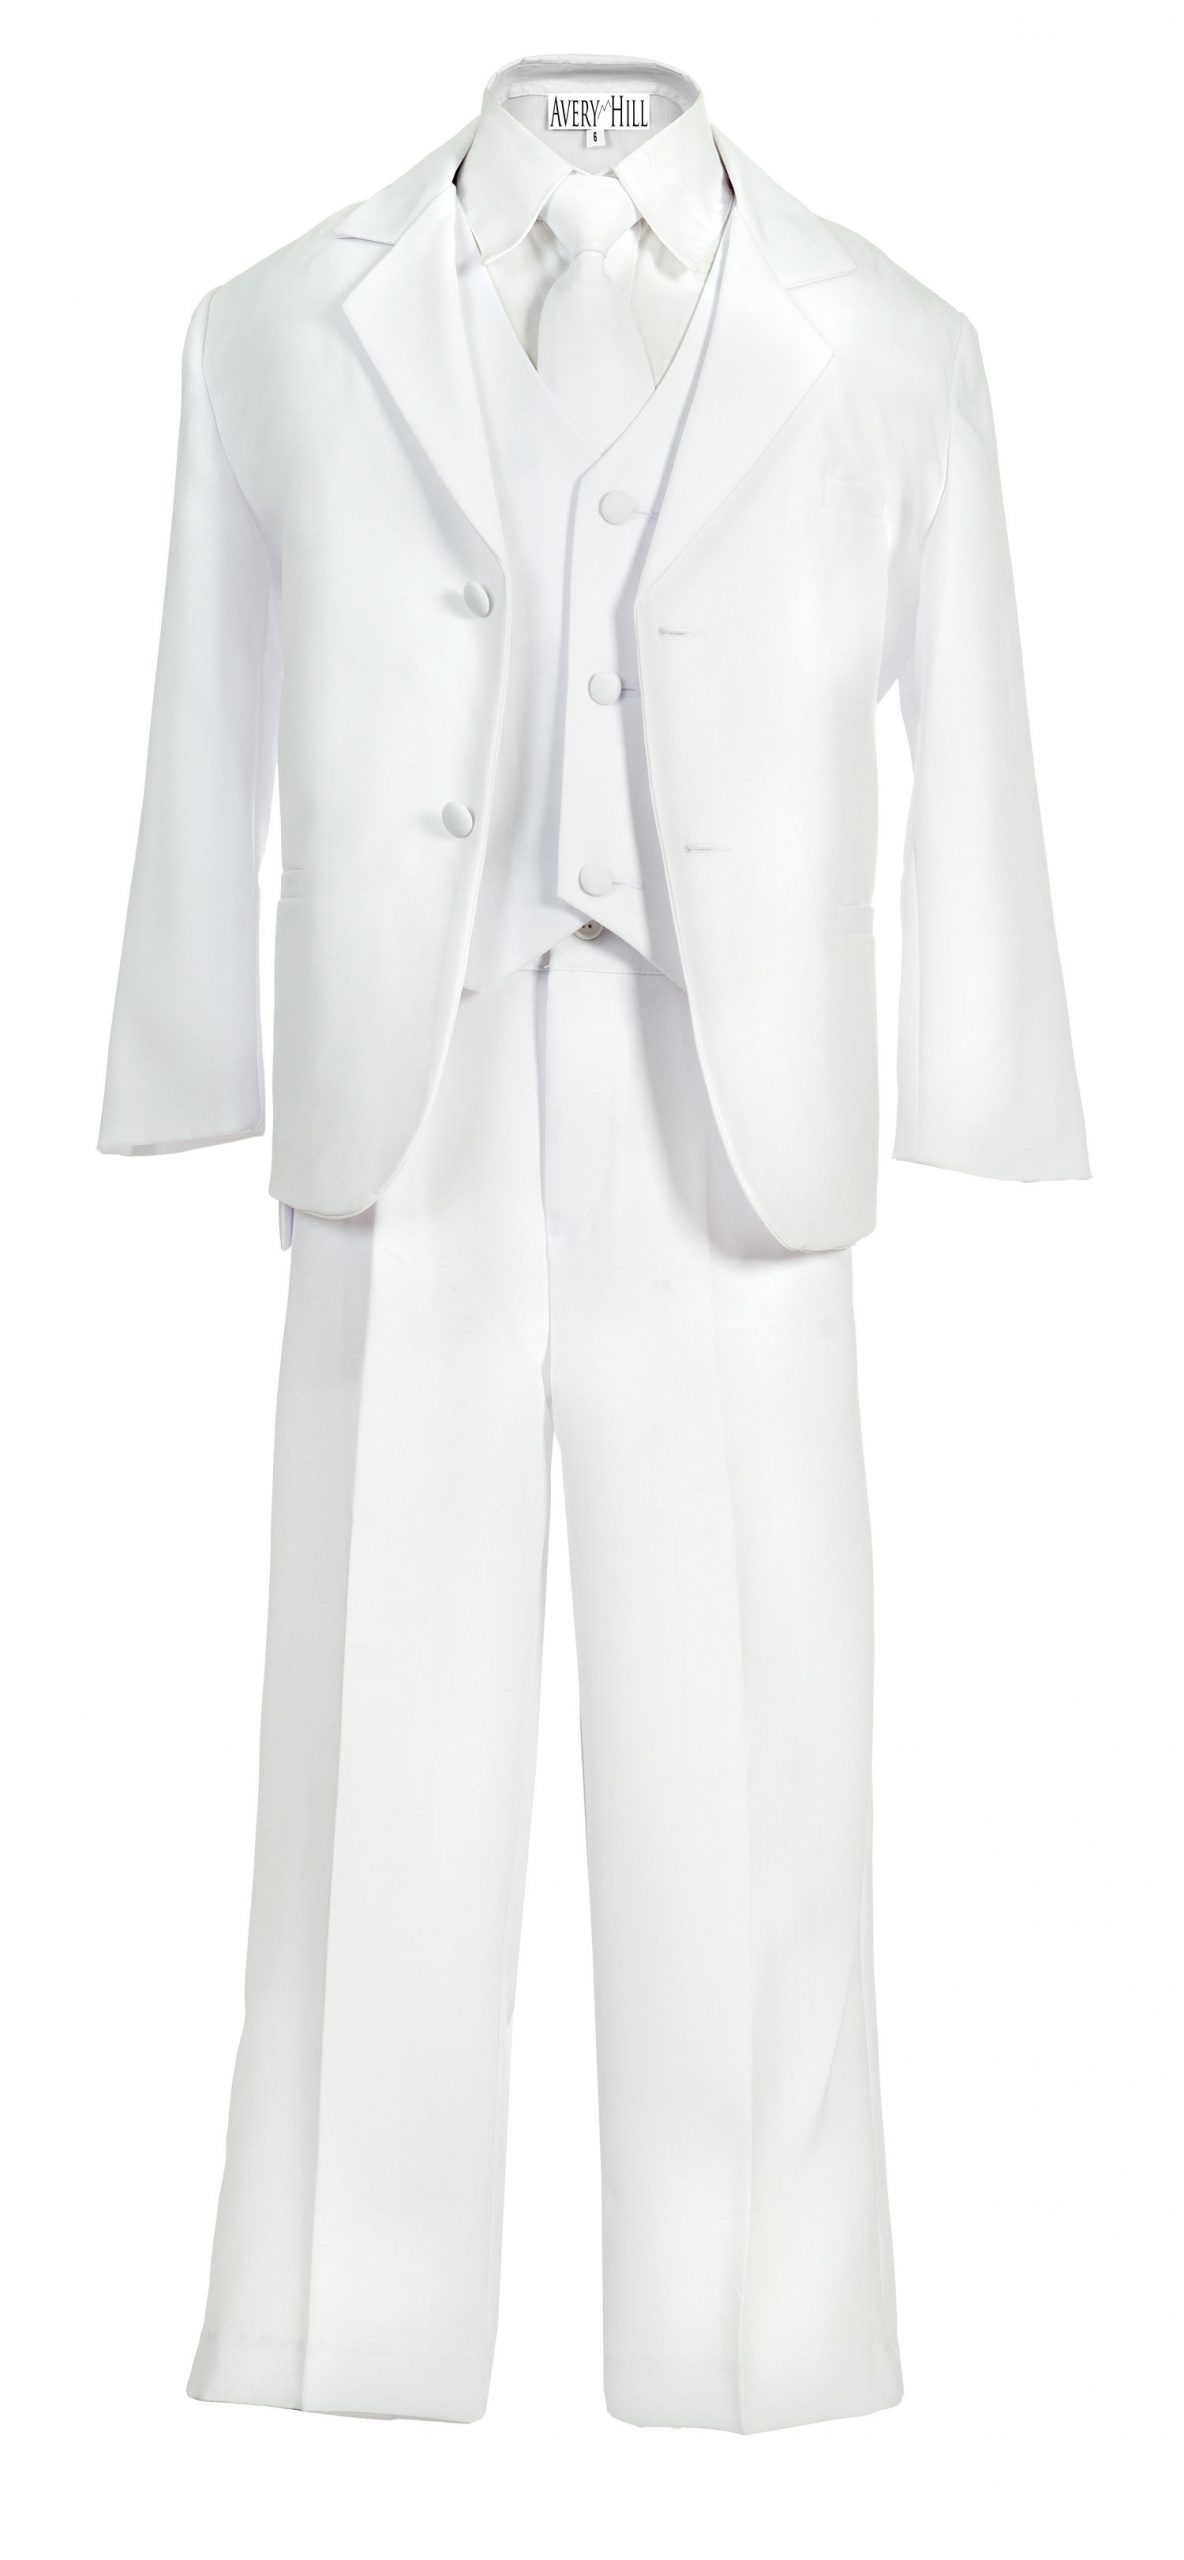 Avery Hill Boys Formal 5 Piece Suit with Shirt and Vest White - 12